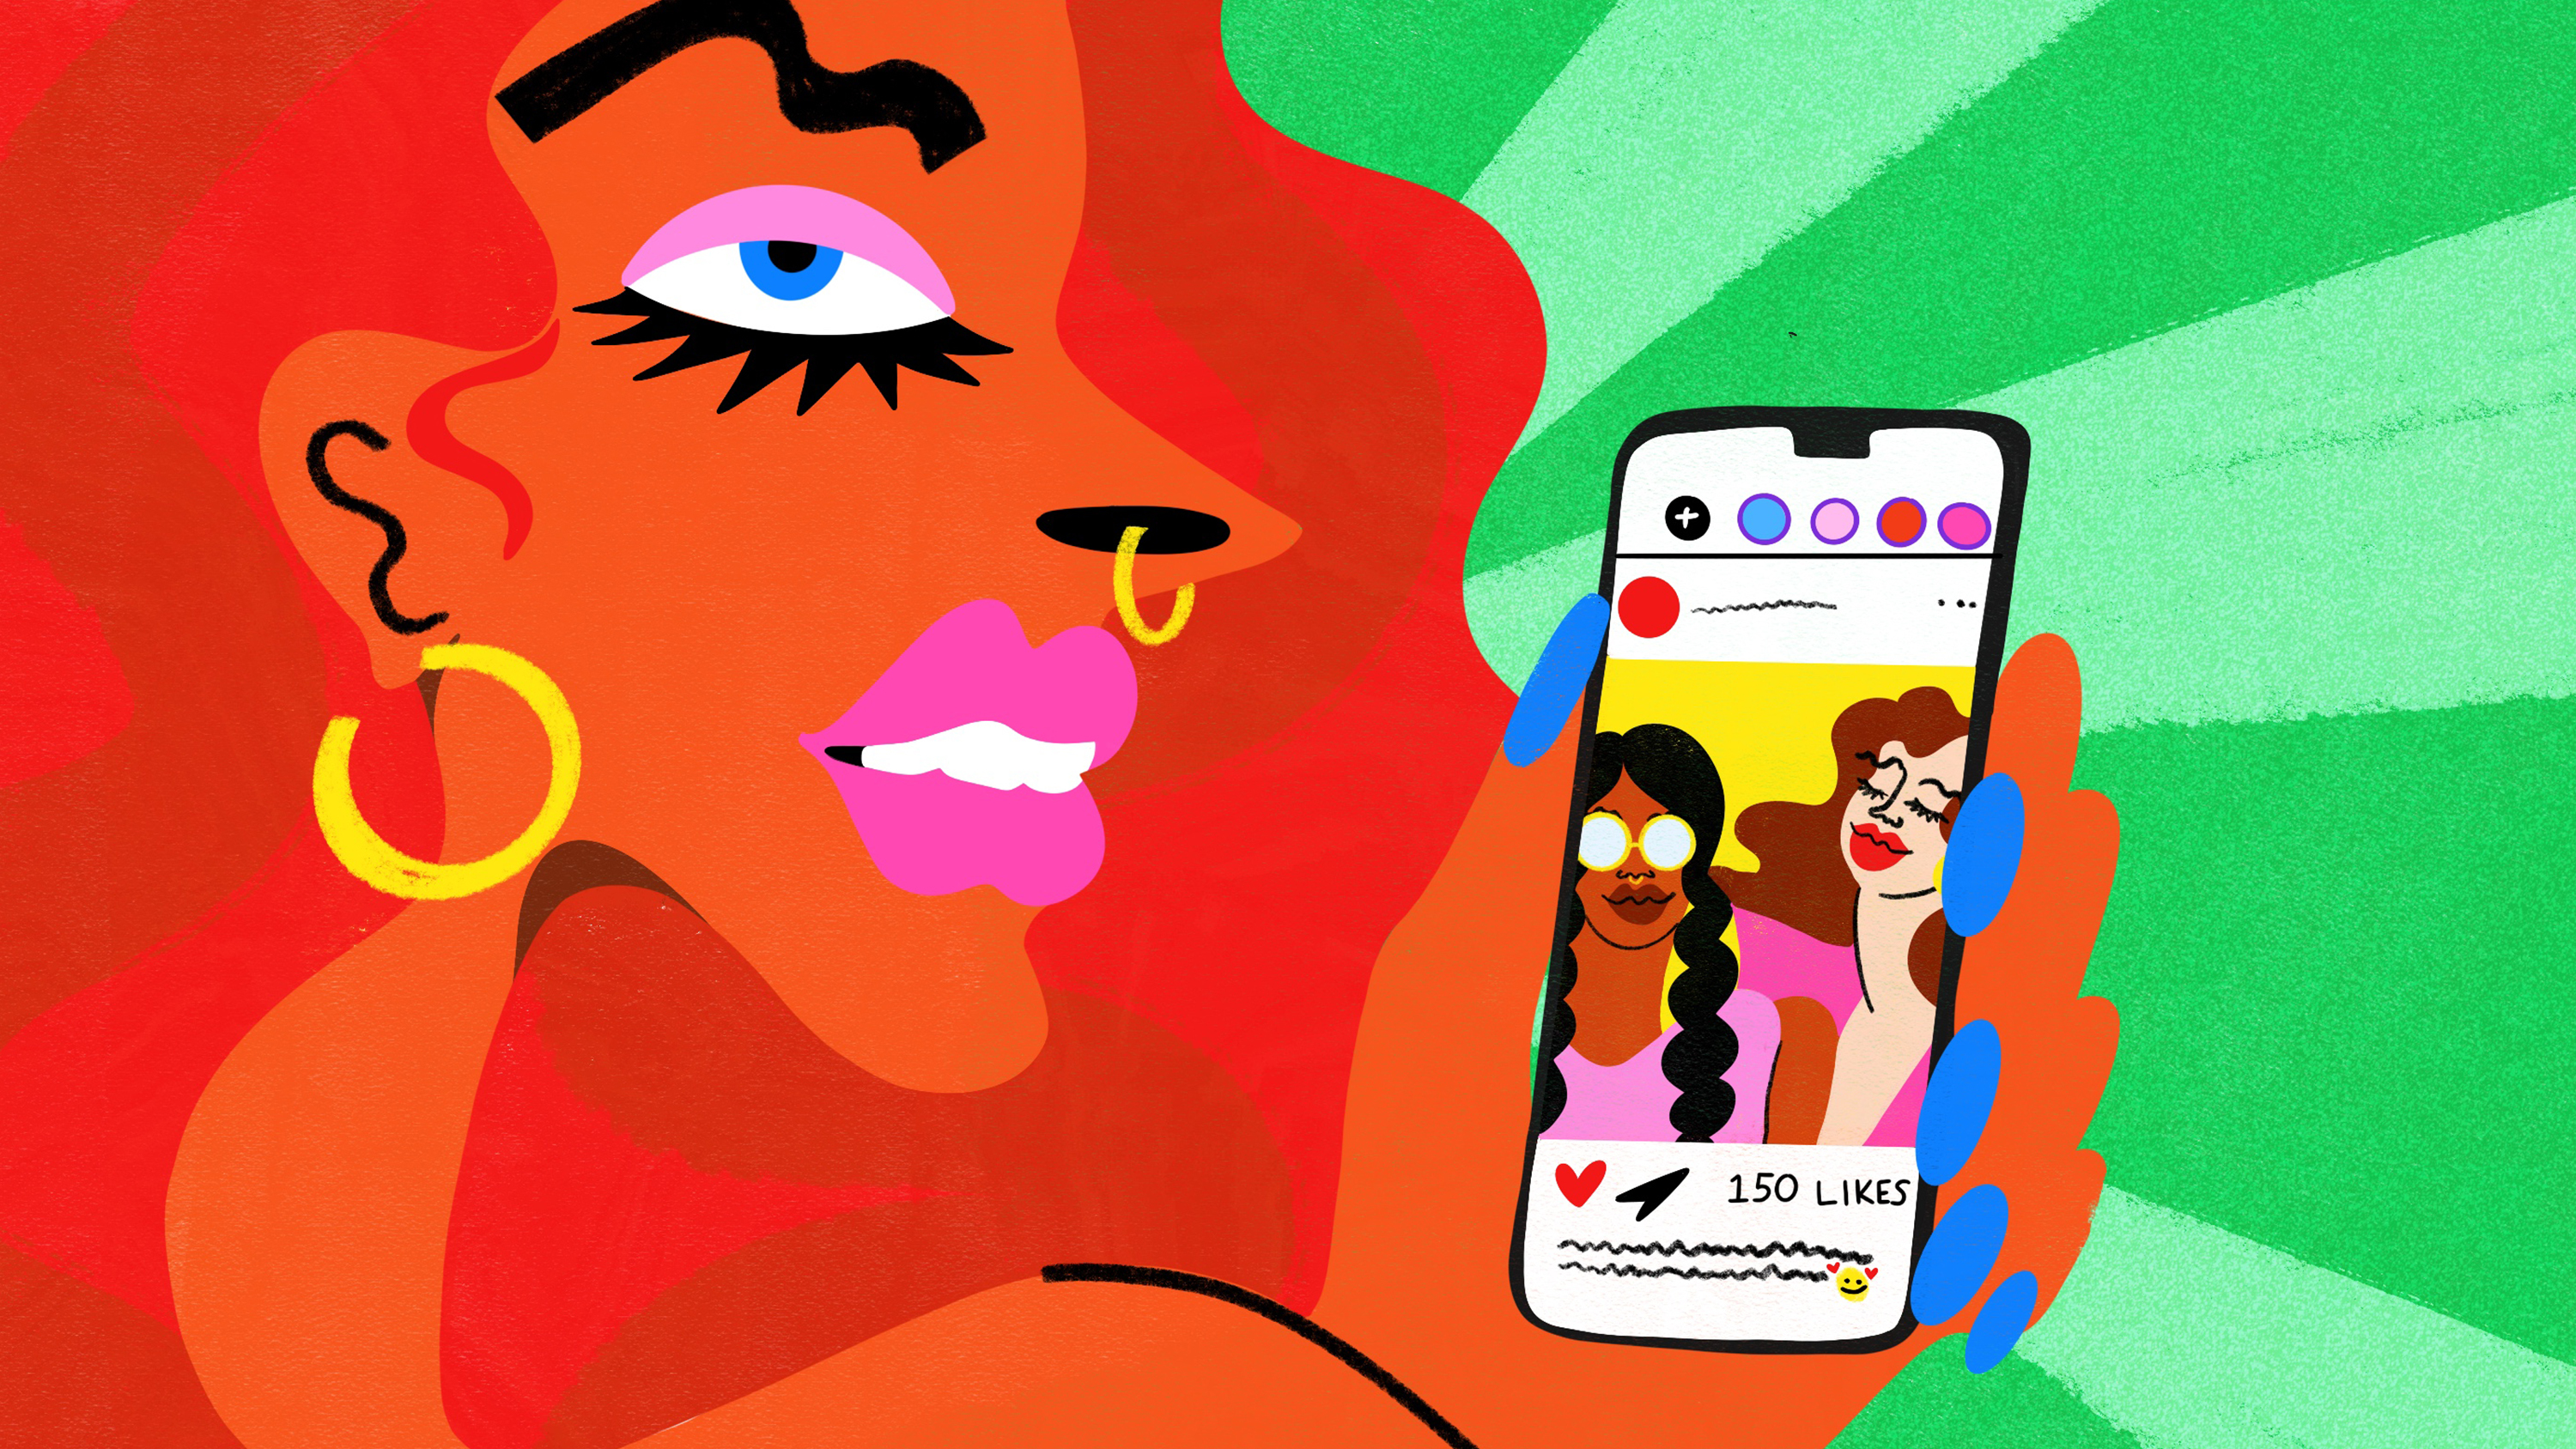 A brightly colored illustration of a woman with wavy hair and an unhappy expression, looking at a phone screen showing two happy-looking people in a photo on social media.